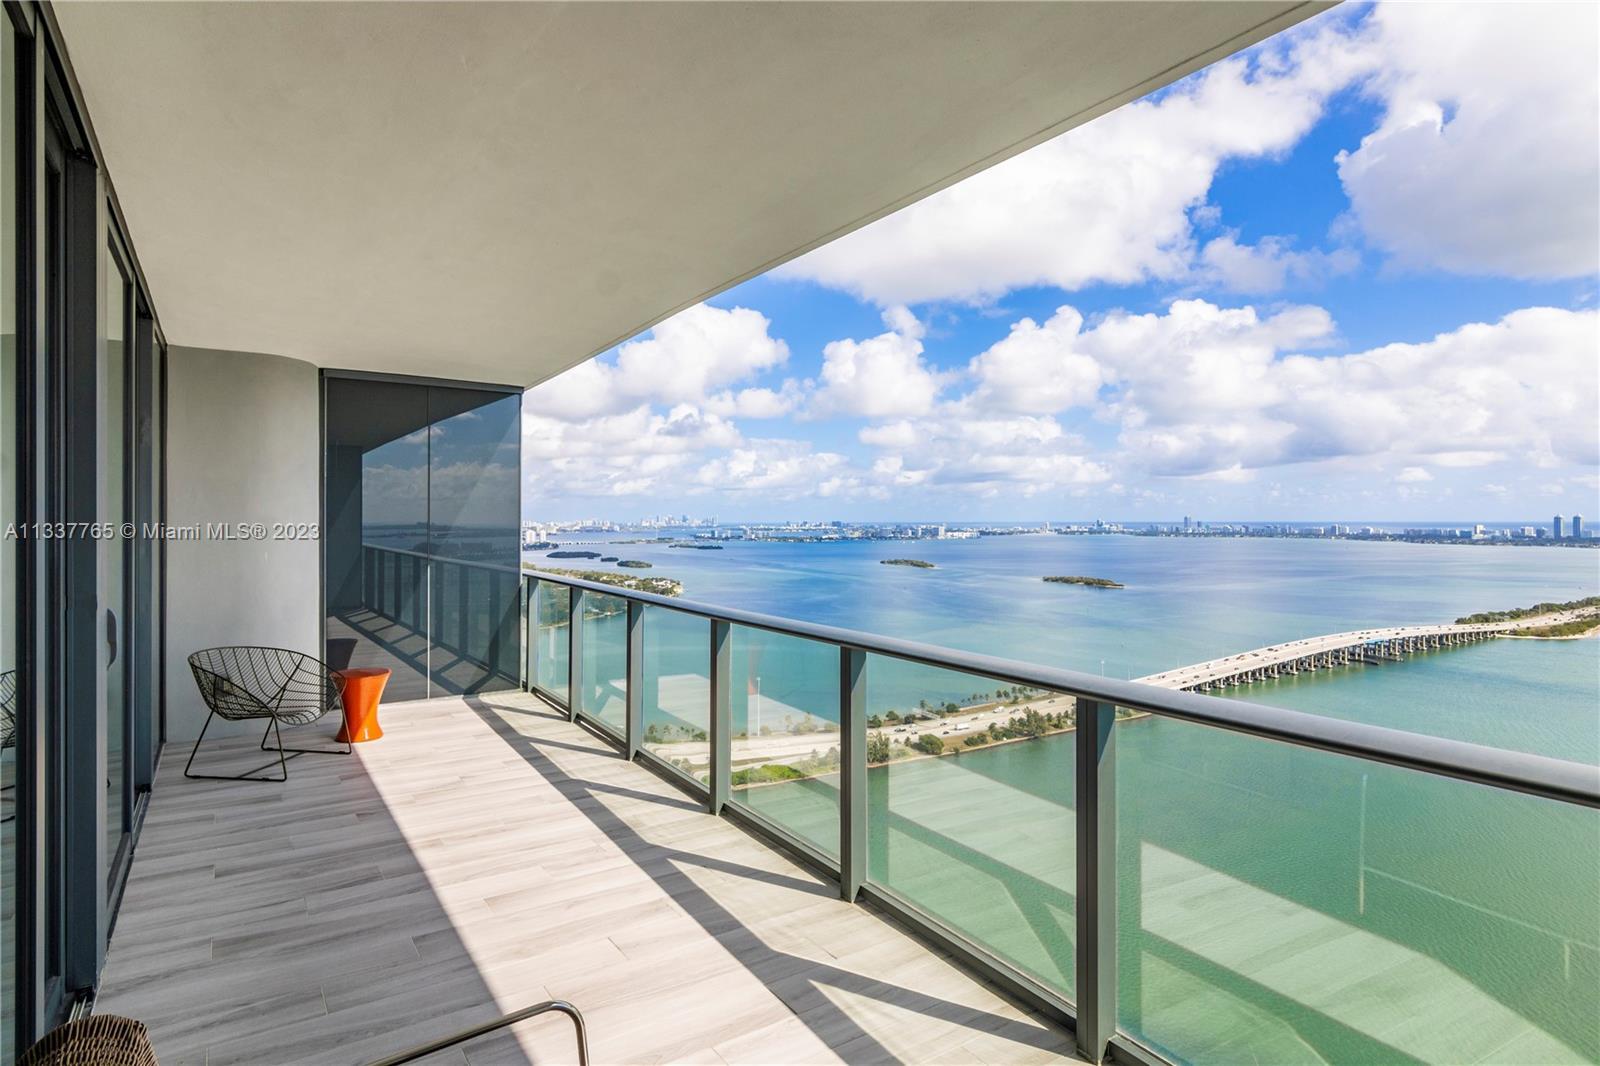 Live in this spectacular one bedroom residence at One Paraiso, skying above the Biscayne Bay. This u